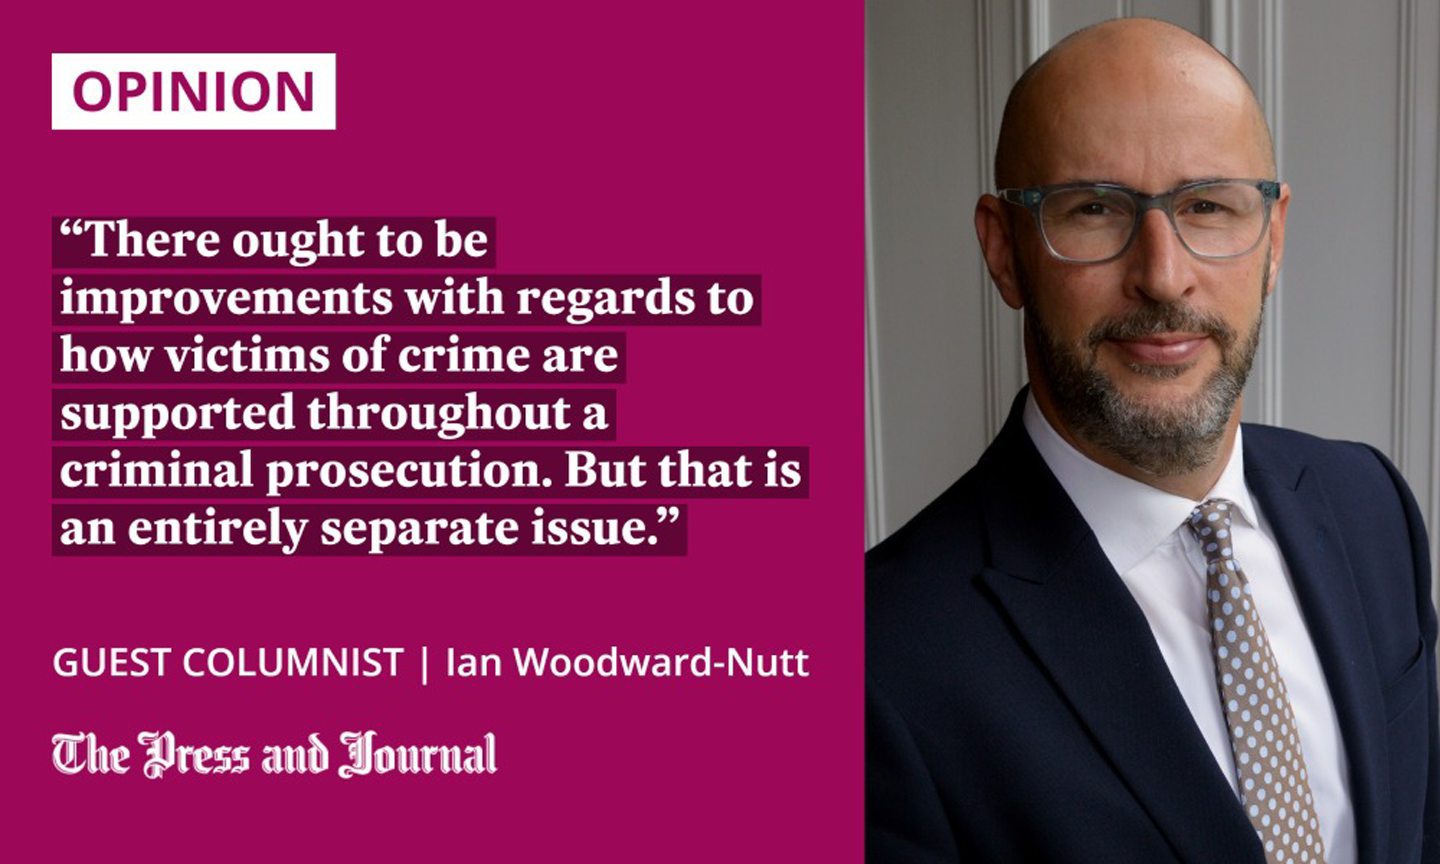 Quotation from guest columnist Ian Woodward-Nutt: 'There ought to be improvements with regards to how victims of crime are supported throughout a criminal prosecution. But that is an entirely separate issue.'